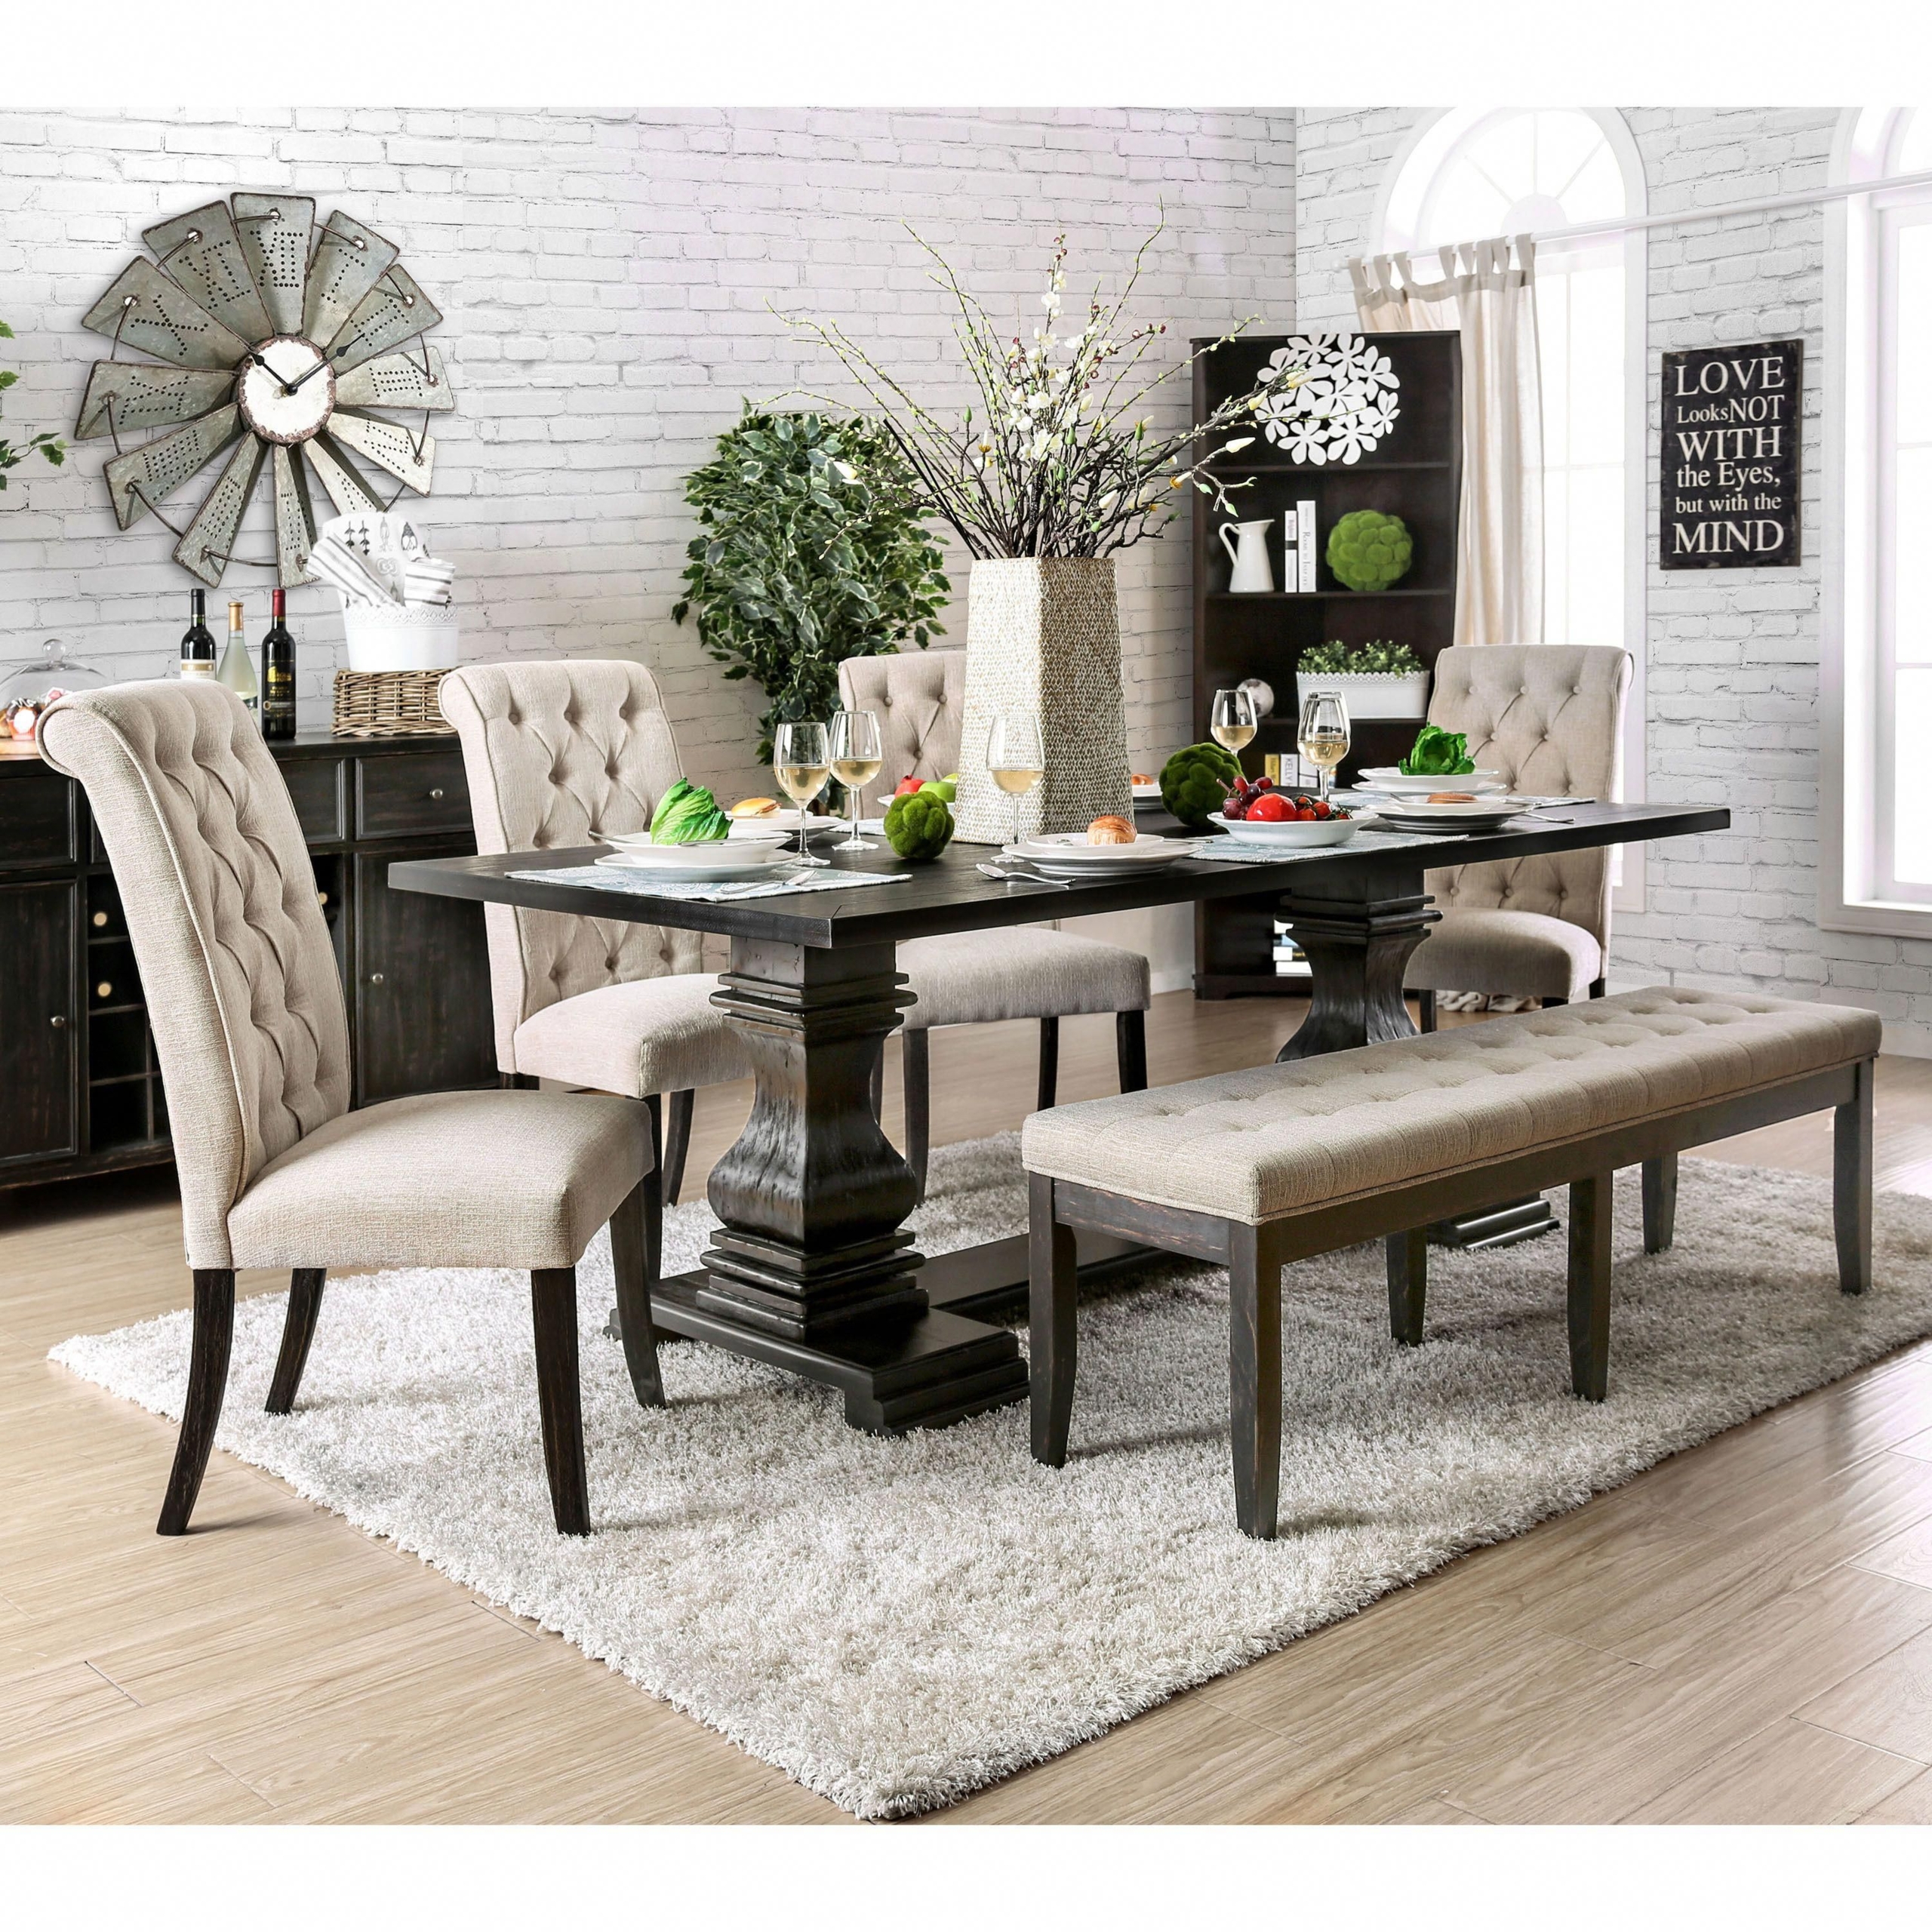 Formal Dining Room Sets Visualhunt, How To Set A Formal Dining Room Table